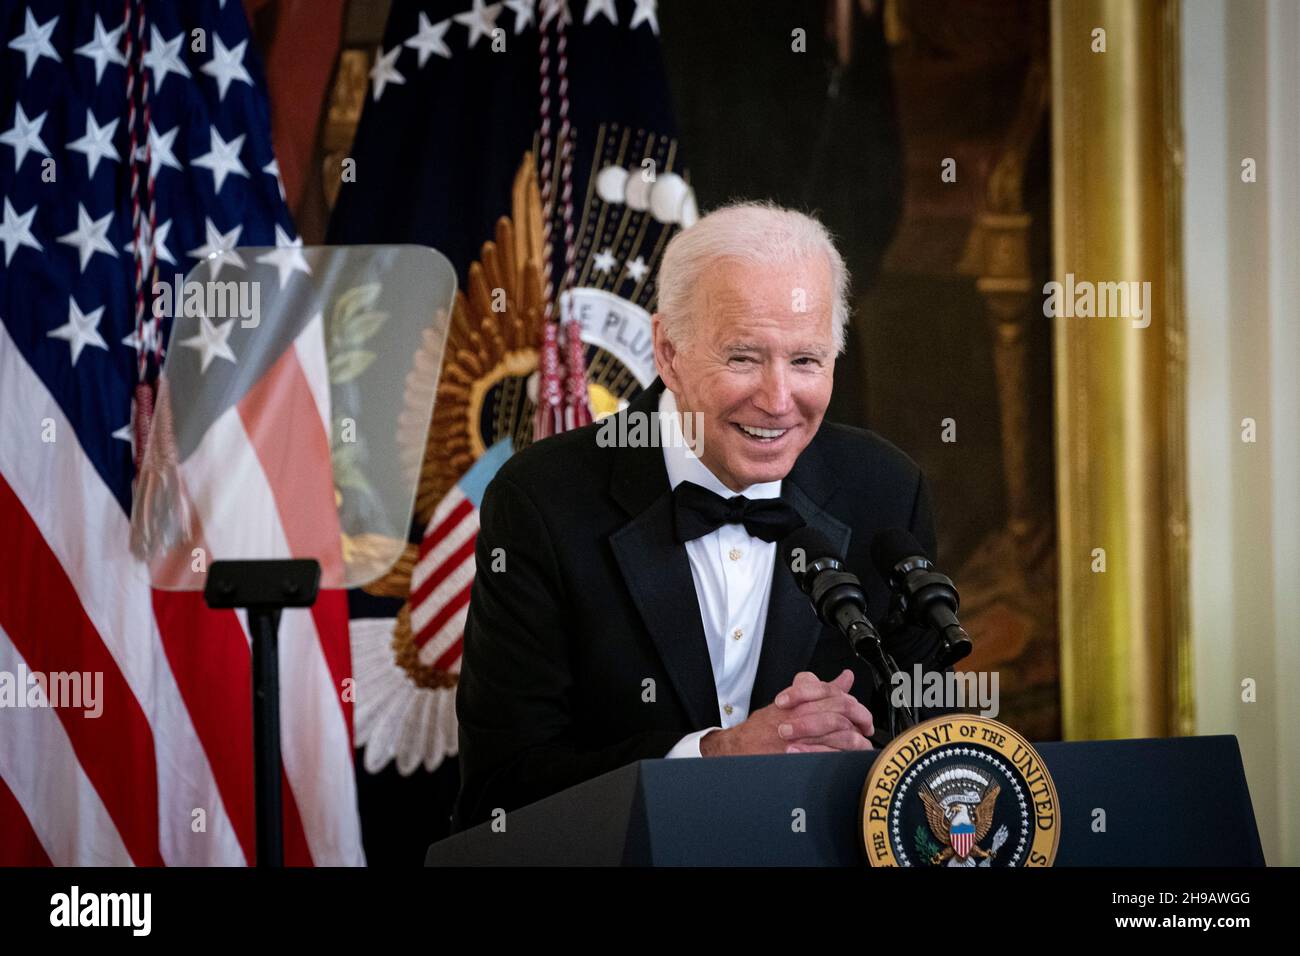 Washington, DC, U.S., on Sunday, Dec. 5, 2021. U.S. President Joe Biden speaks during the the Kennedy Center Honorees Reception in the East Room of the White House in Washington, DC, U.S., on Sunday, Dec. 5, 2021. The John F. Kennedy Center for the Performing Arts 44th Honorees for lifetime artistic achievements include operatic bass-baritone Justino Diaz, Motown founder Berry Gordy, Saturday Night Live creator Lorne Michaels, actress Bette Midler, and singer-songwriter Joni Mitchell. Credit: Al Drago/Pool via CNP /MediaPunch Stock Photo